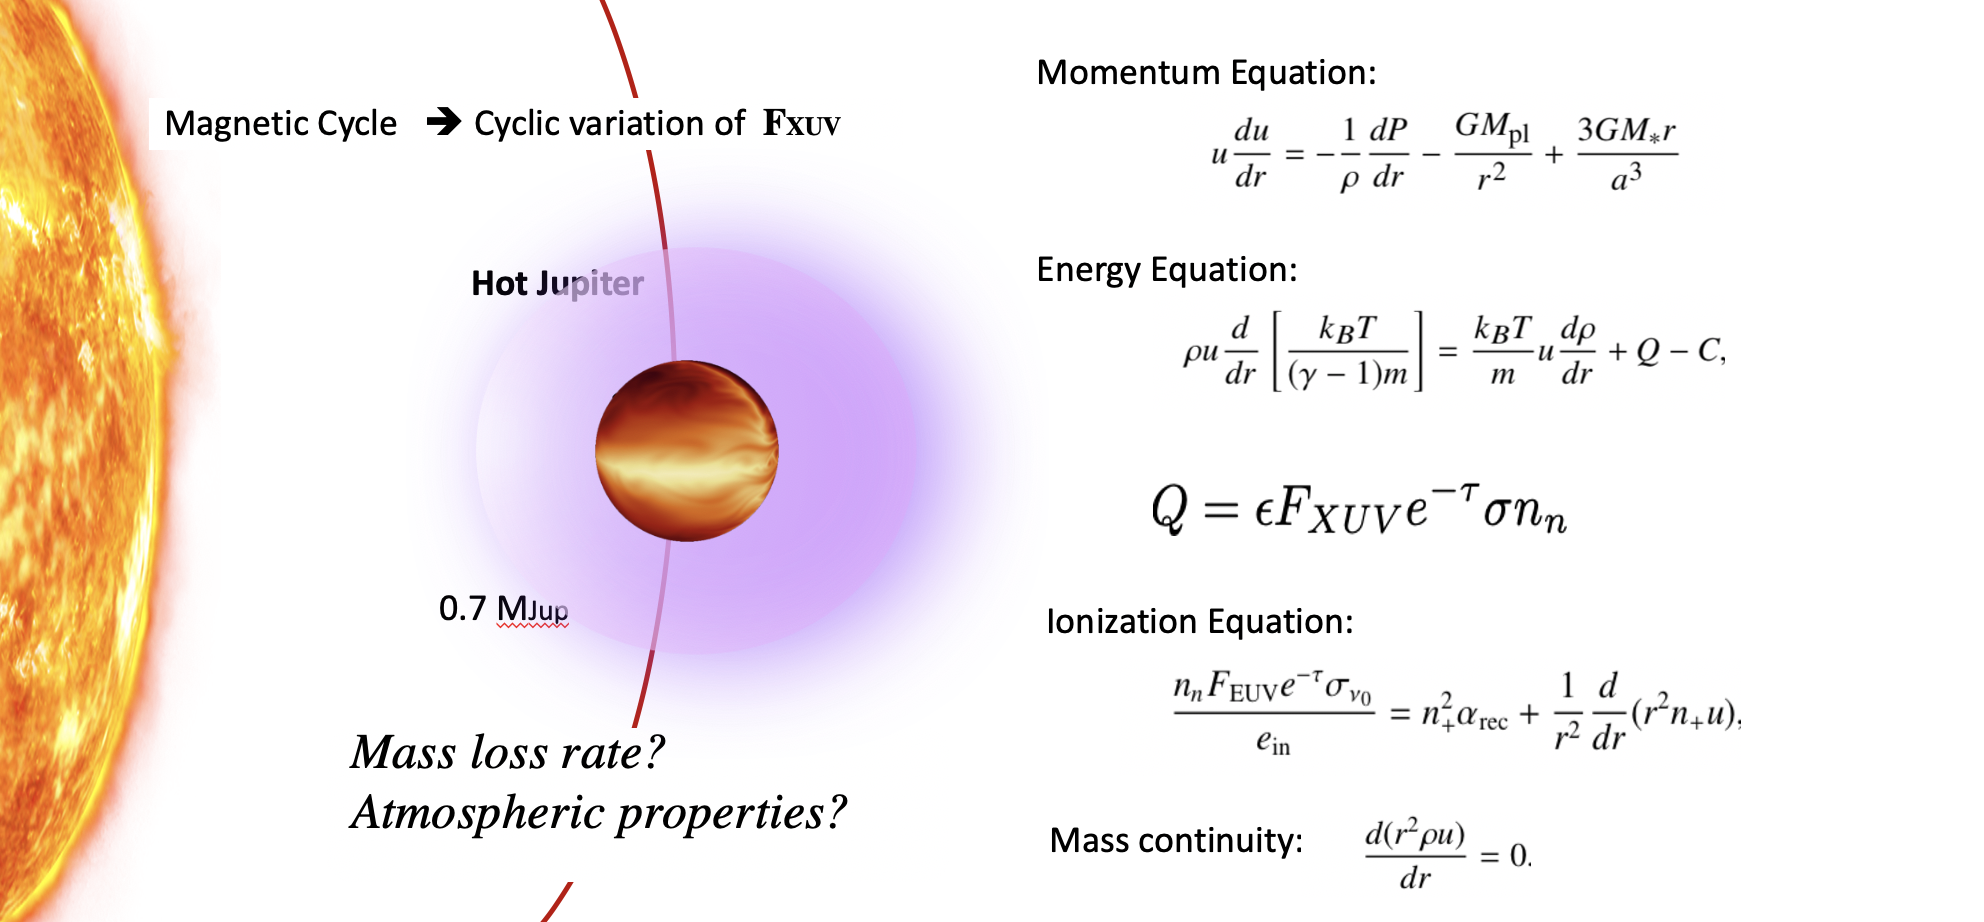 A hot jupitor is orbiting the Sun at a =0.05 AU. The model equations for the planetary escape including heating and cooling are shown